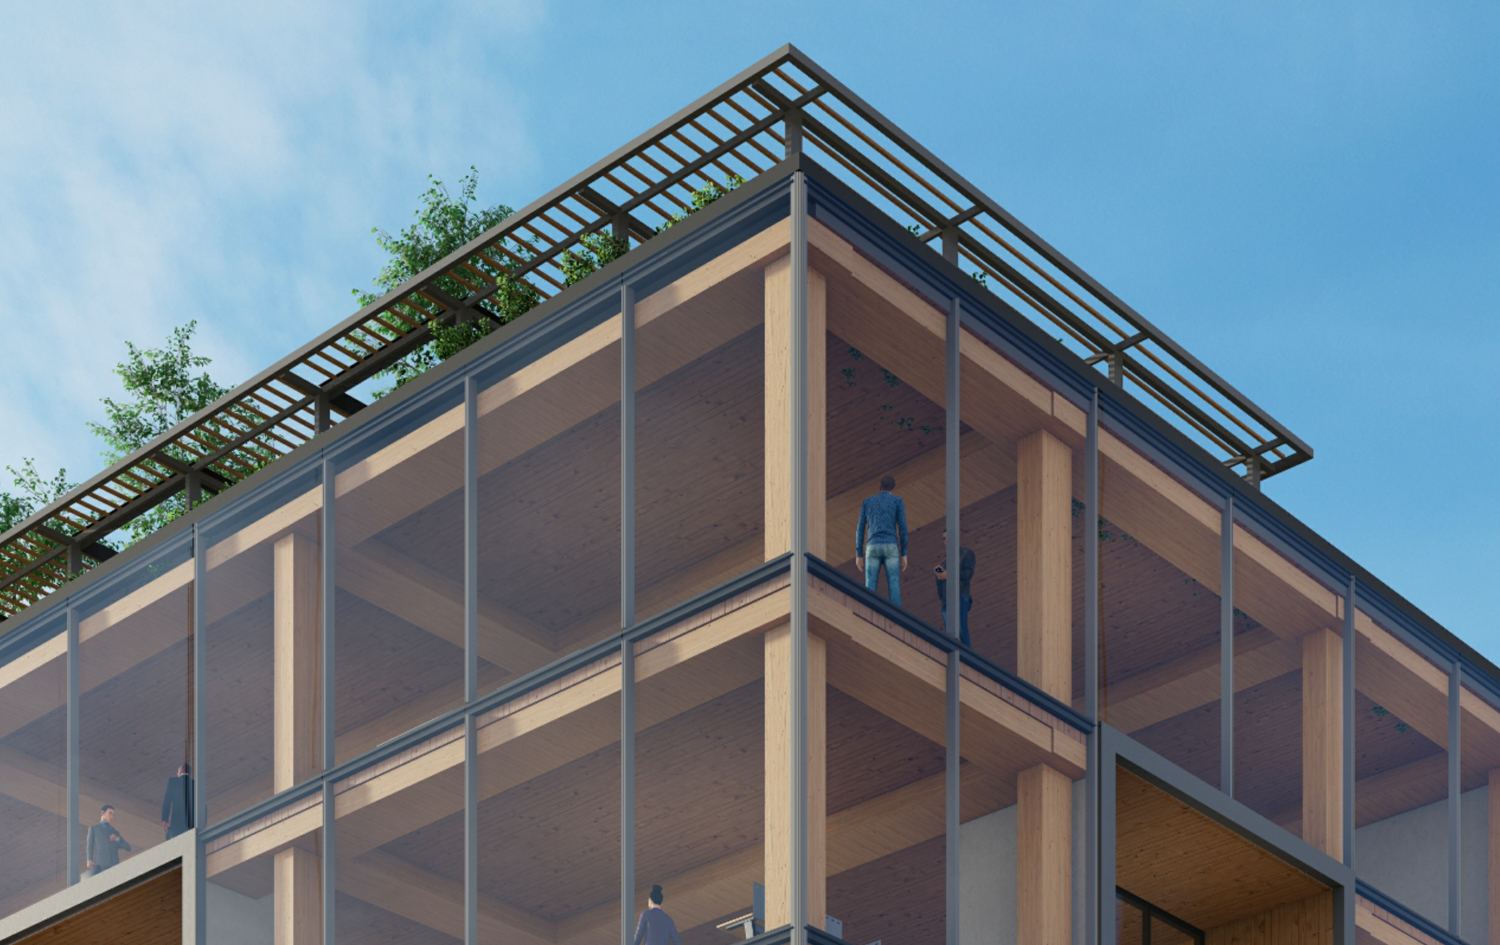 17 South Fourth Street closeup view of cross-laminated timber structure, rendering courtesy Bayview Development Group